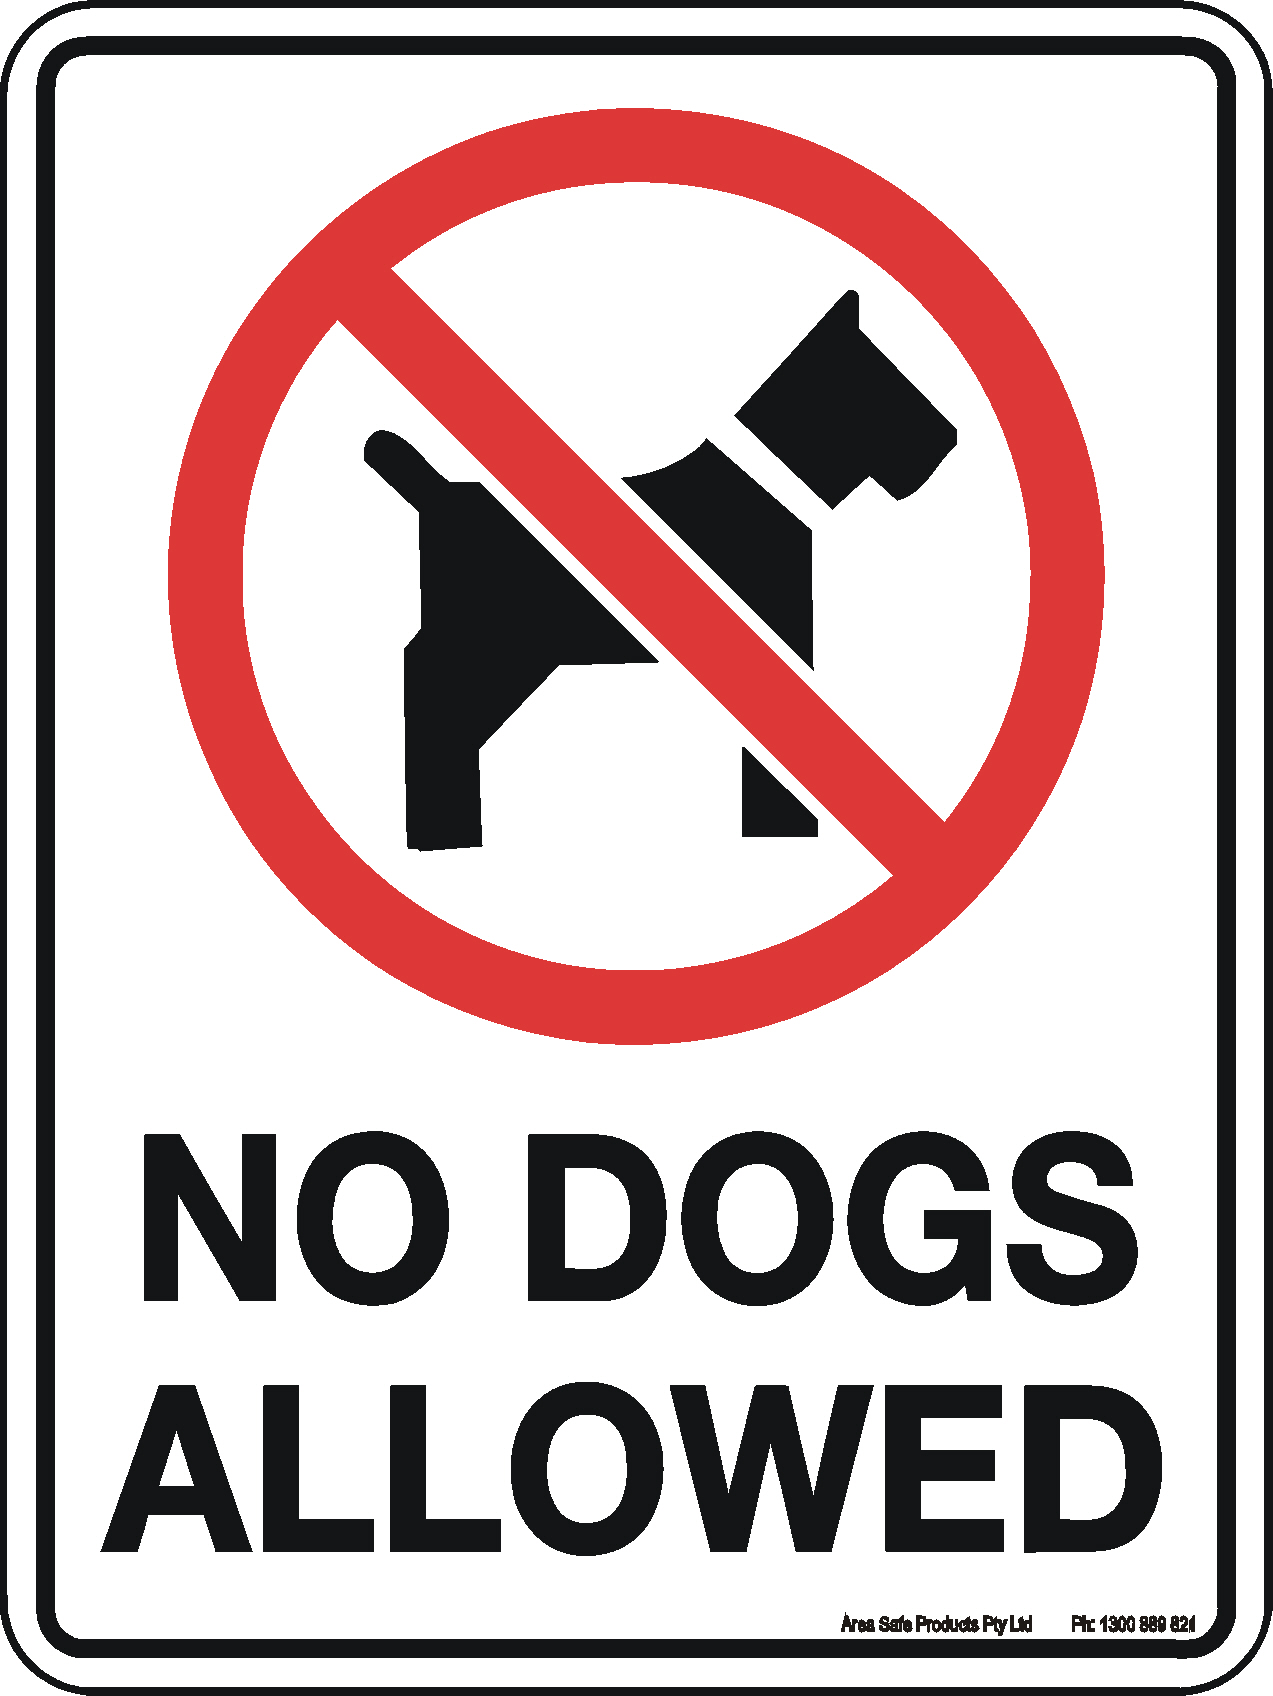 Not allowed tv текст. No Dogs allowed. No Dogs allowed sign. Знак Russians and Dogs are not allowed. Not allowed Dog.